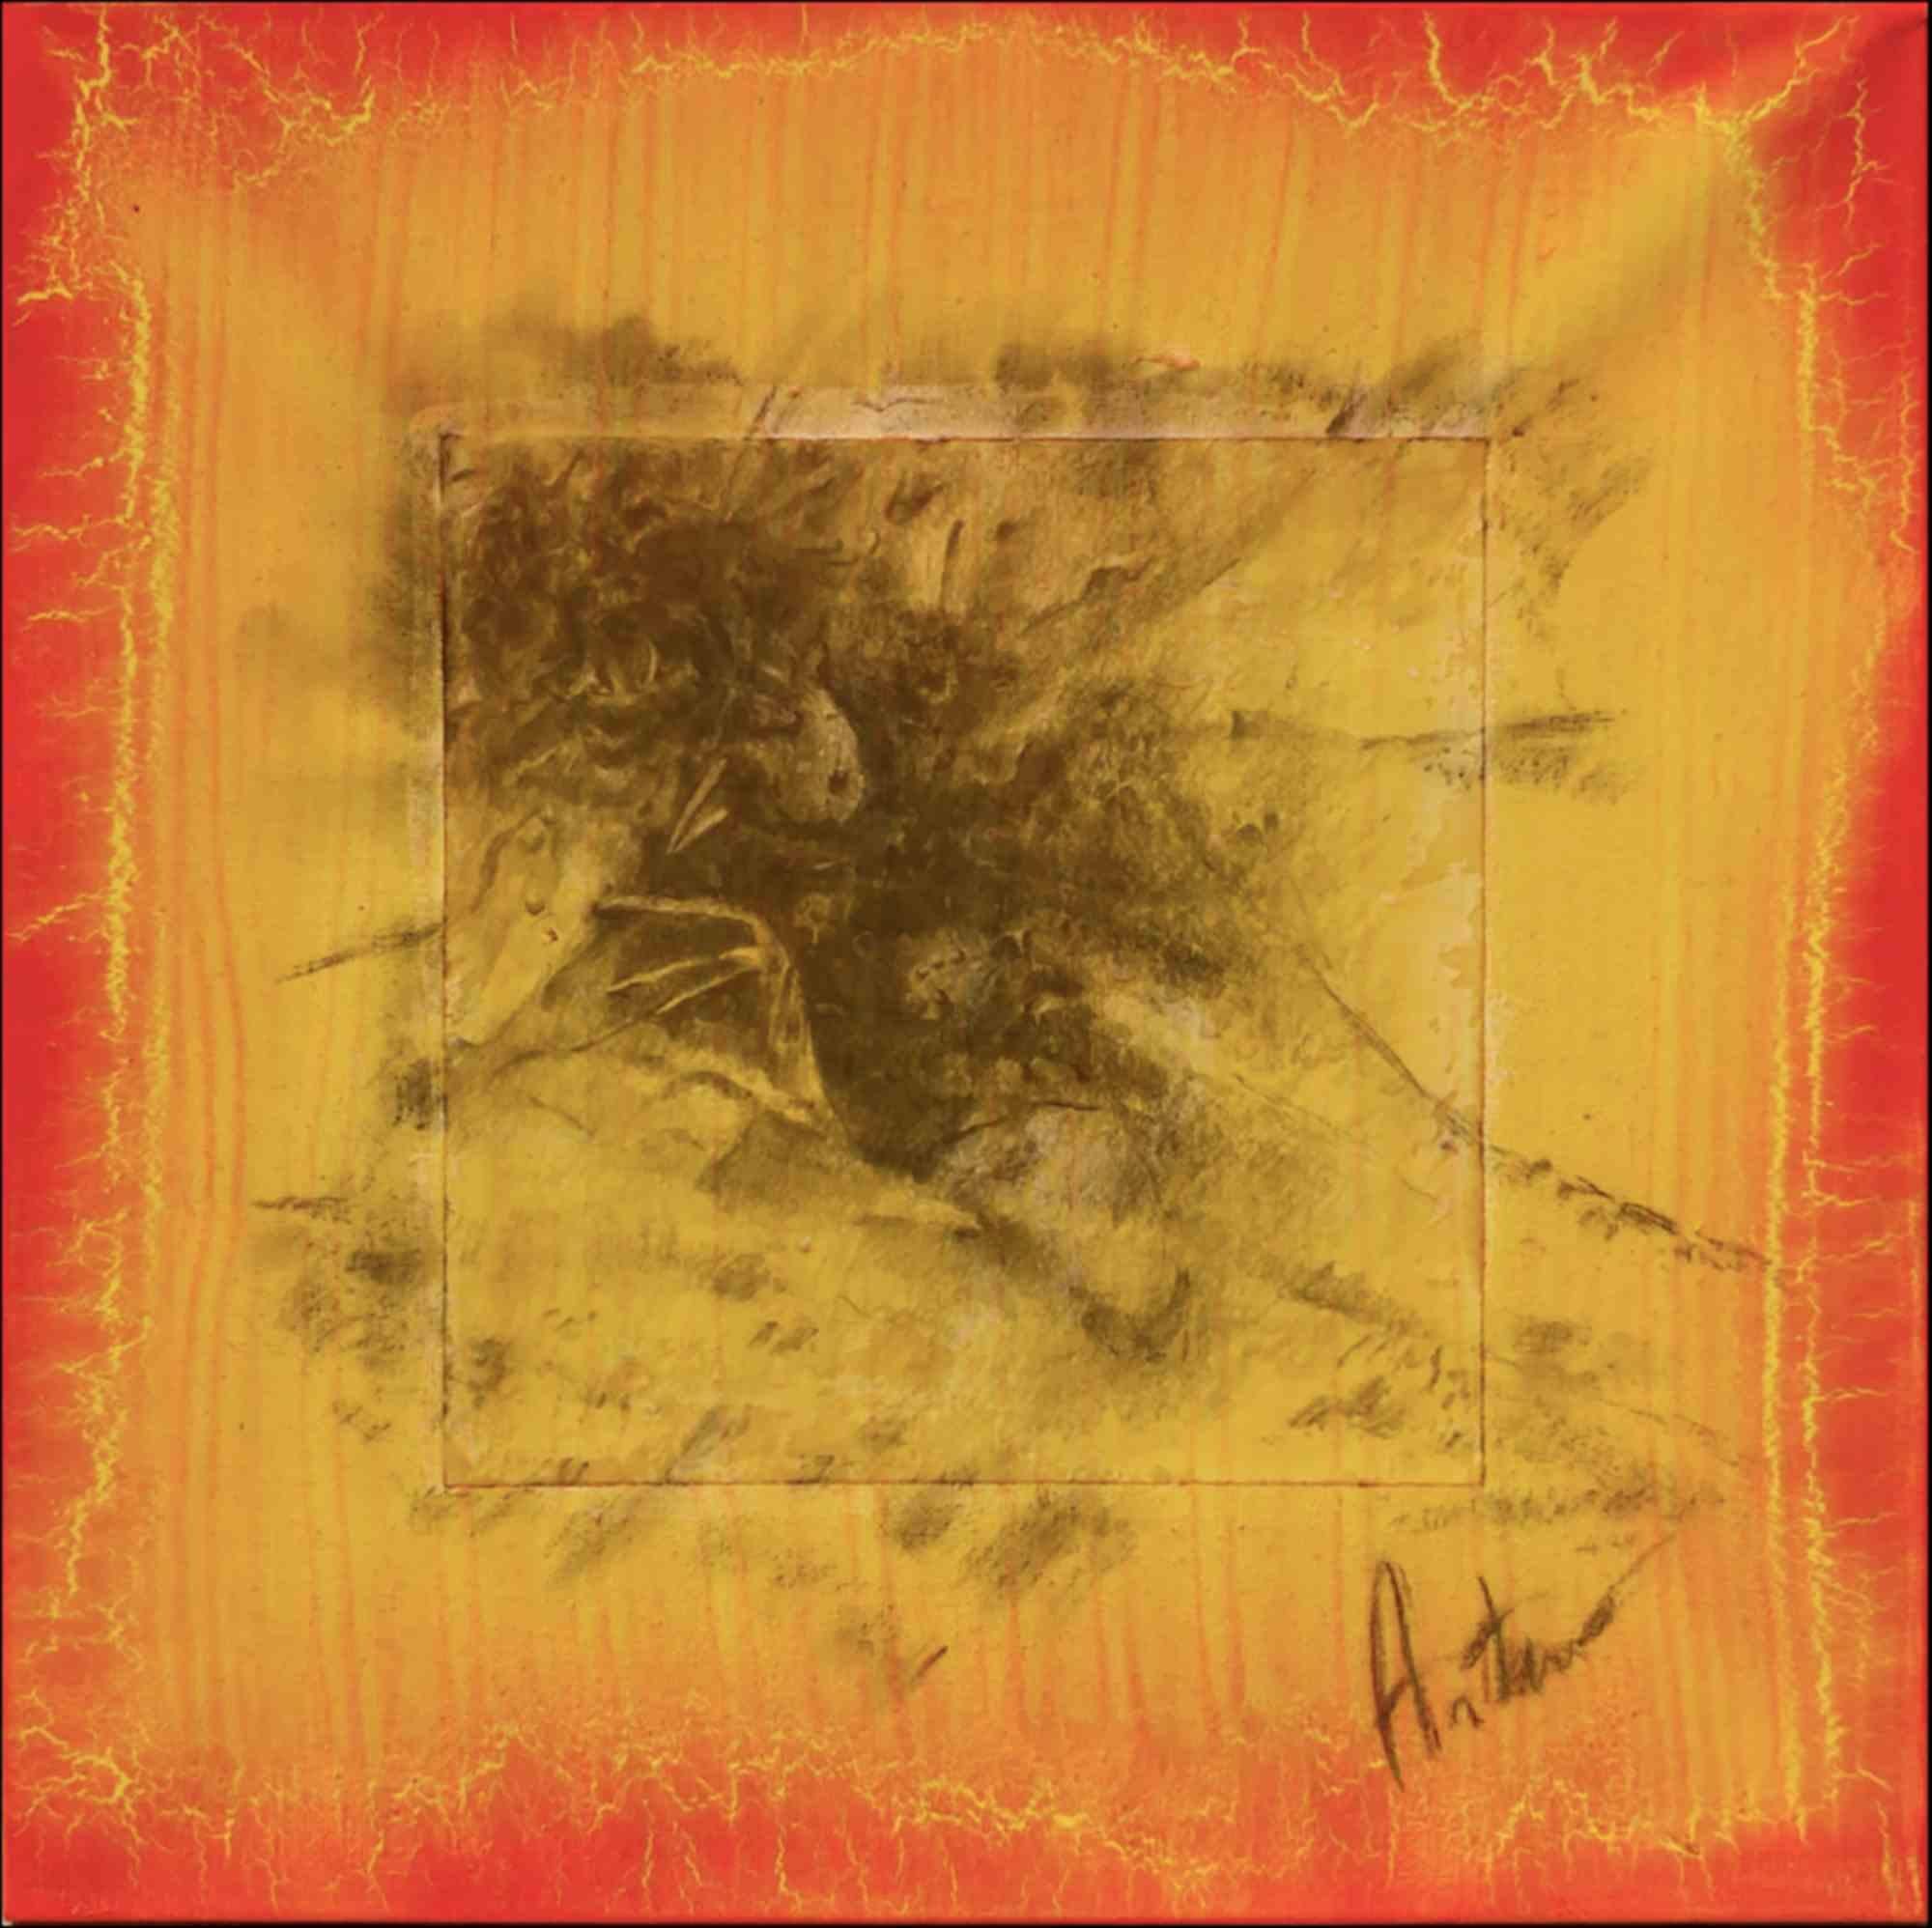 The work is entitled 'Scorci d'infinito red border n.6' and is part of the series 'Scorci di infinito' measuring 40 × 40 cm by the artist Artemio Ceresa. The technique is mixed media on canvas and the signature on the front is Artemio . The work is